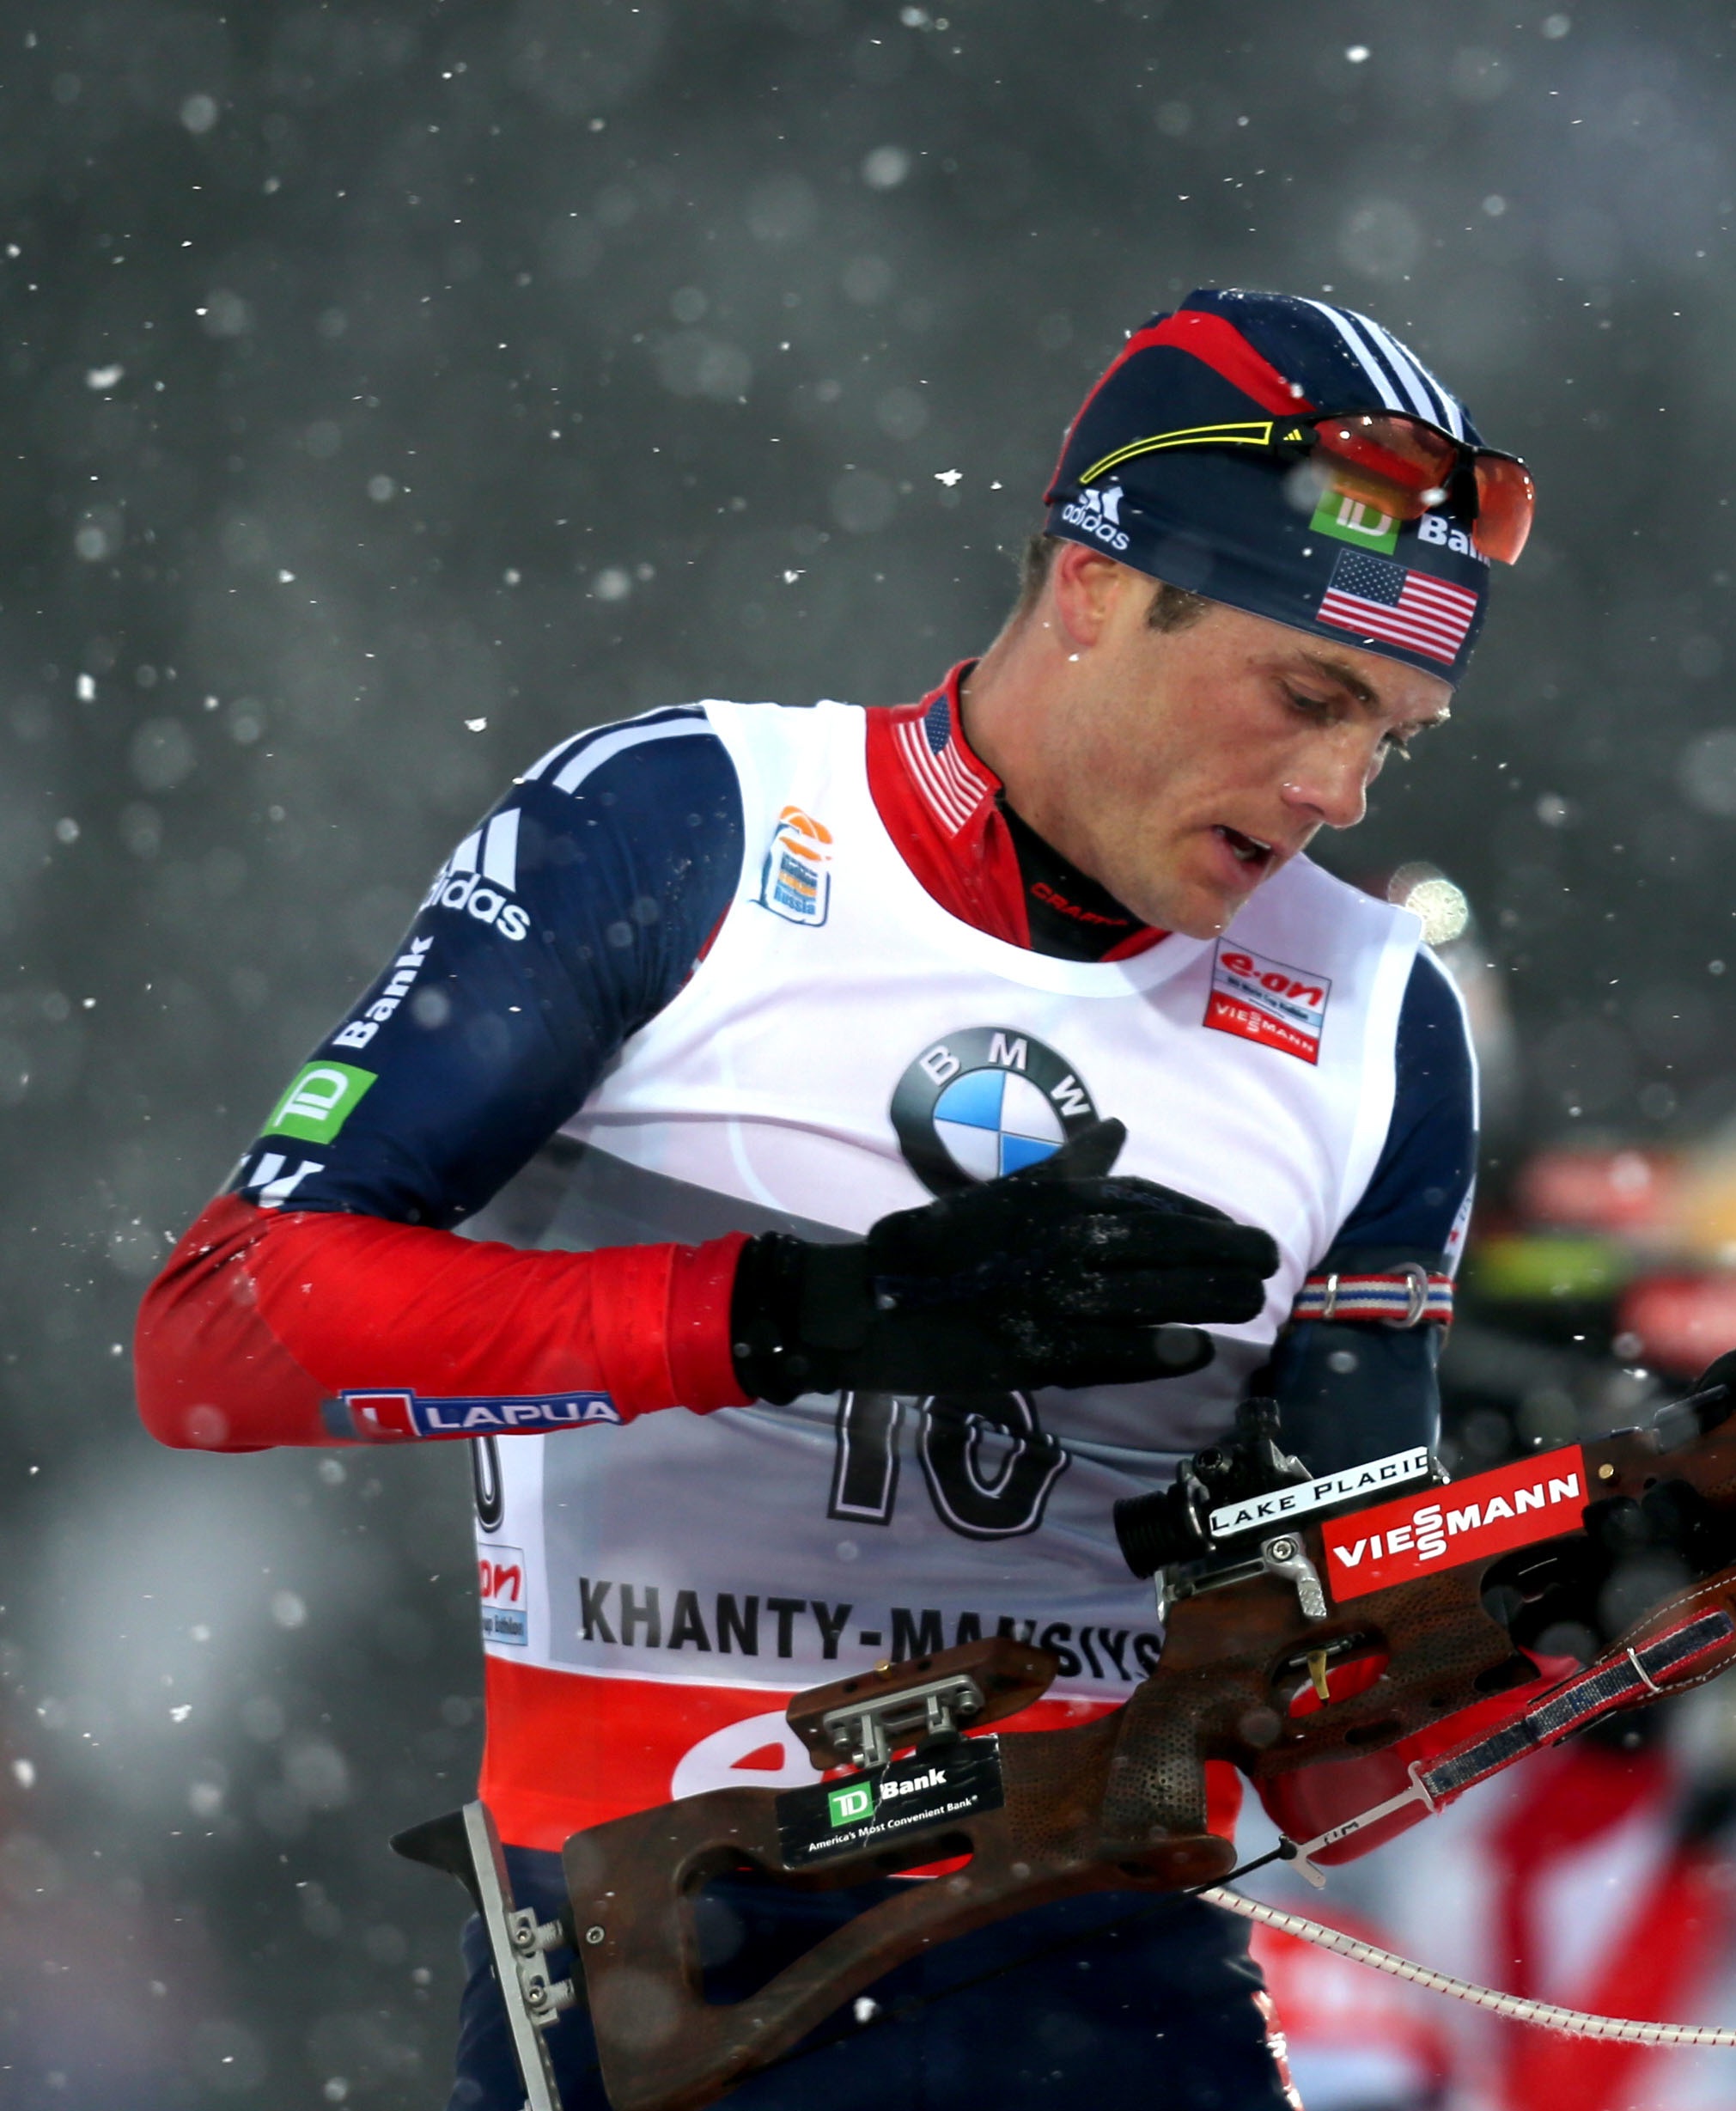 Fourcade Secures Last of Biathlon’s Five Crystal Globes with Mass Start Win; Burke Fourth in Sprint Finish